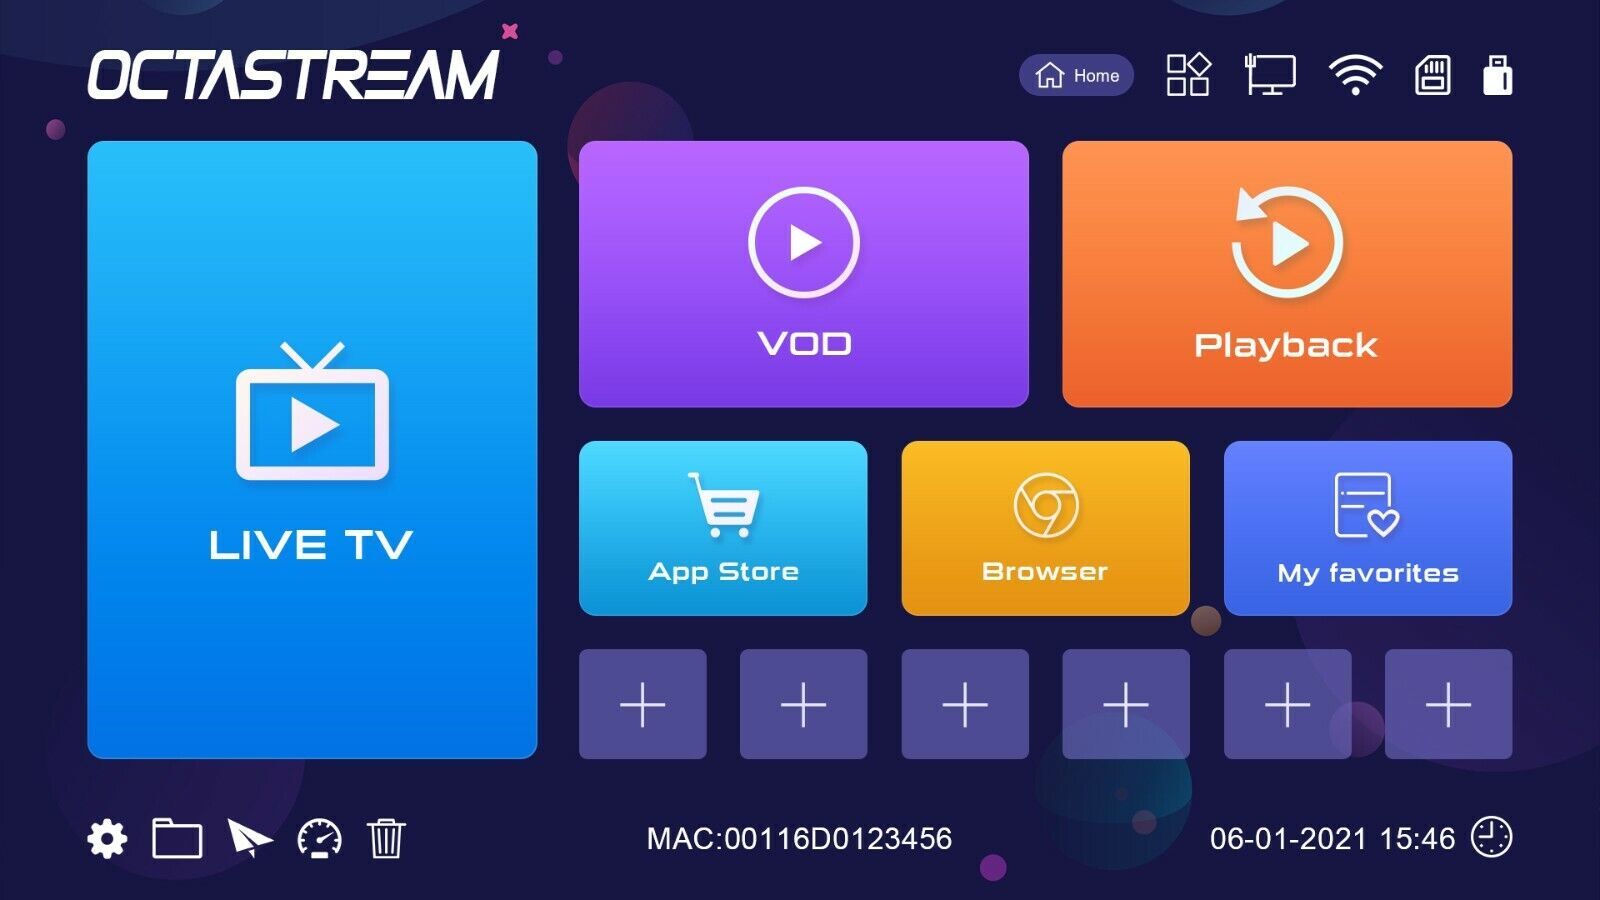 Octastream Manual, But Ultimate Android TV is charging $259 for it.